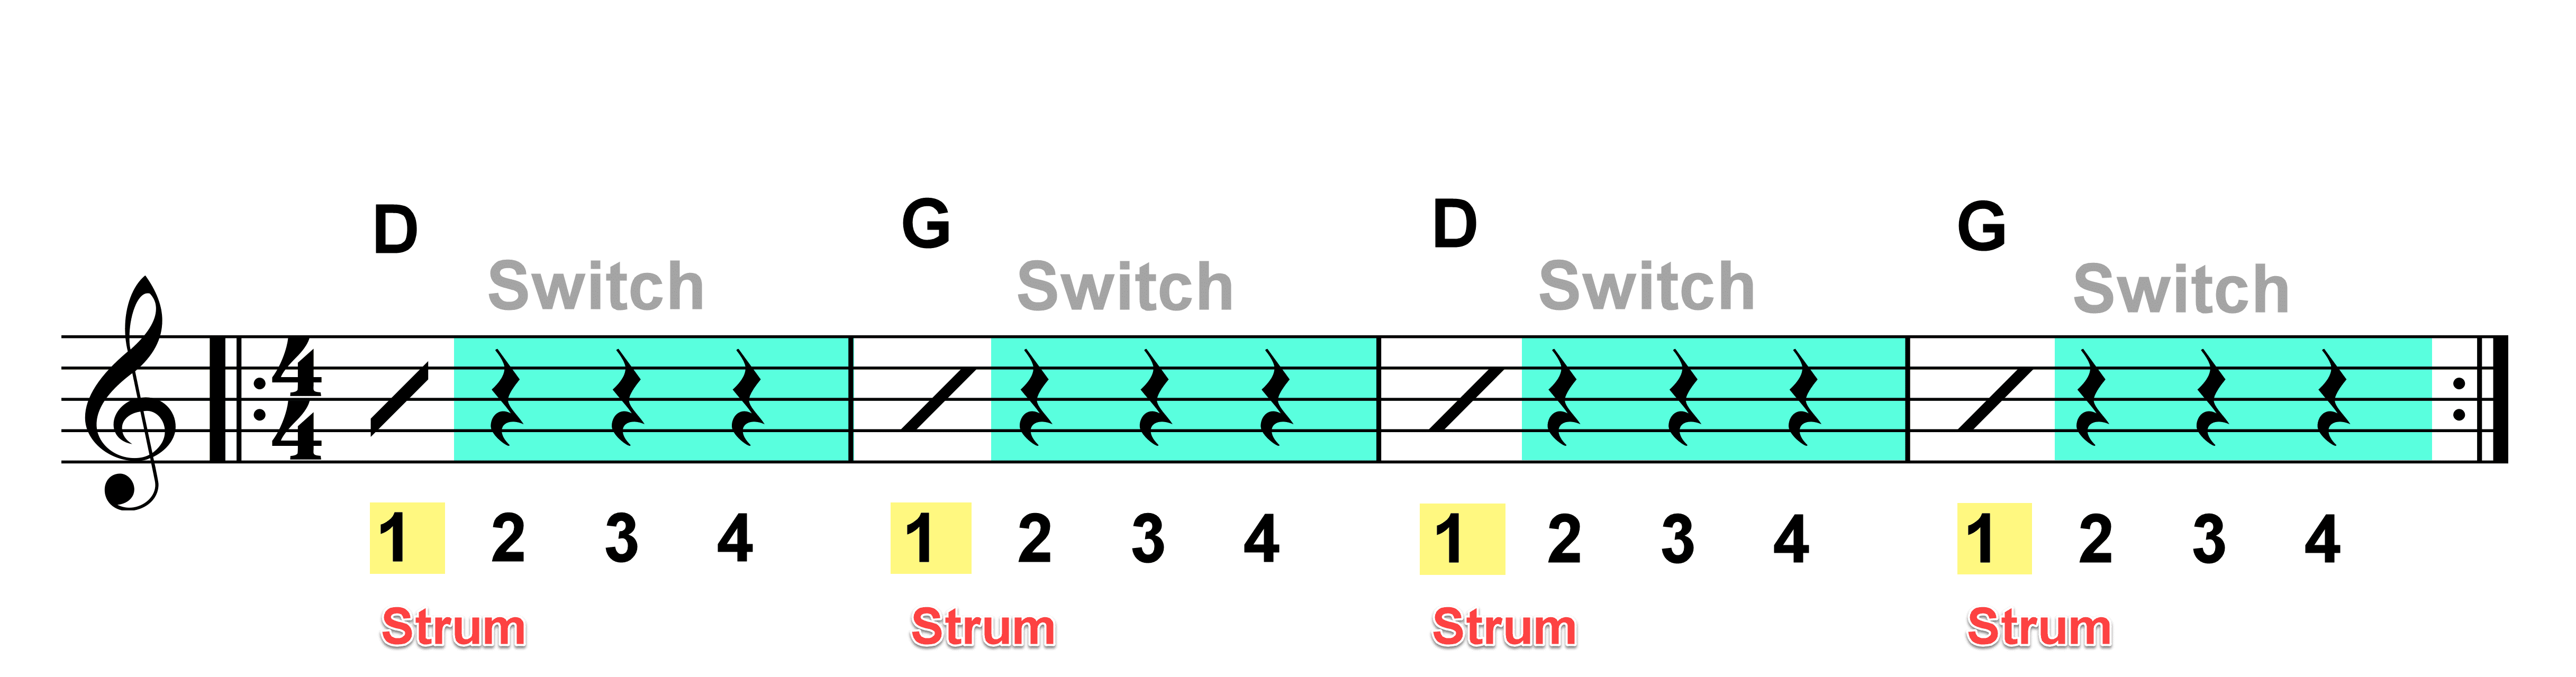 Chord switching game graphics-1 D to G